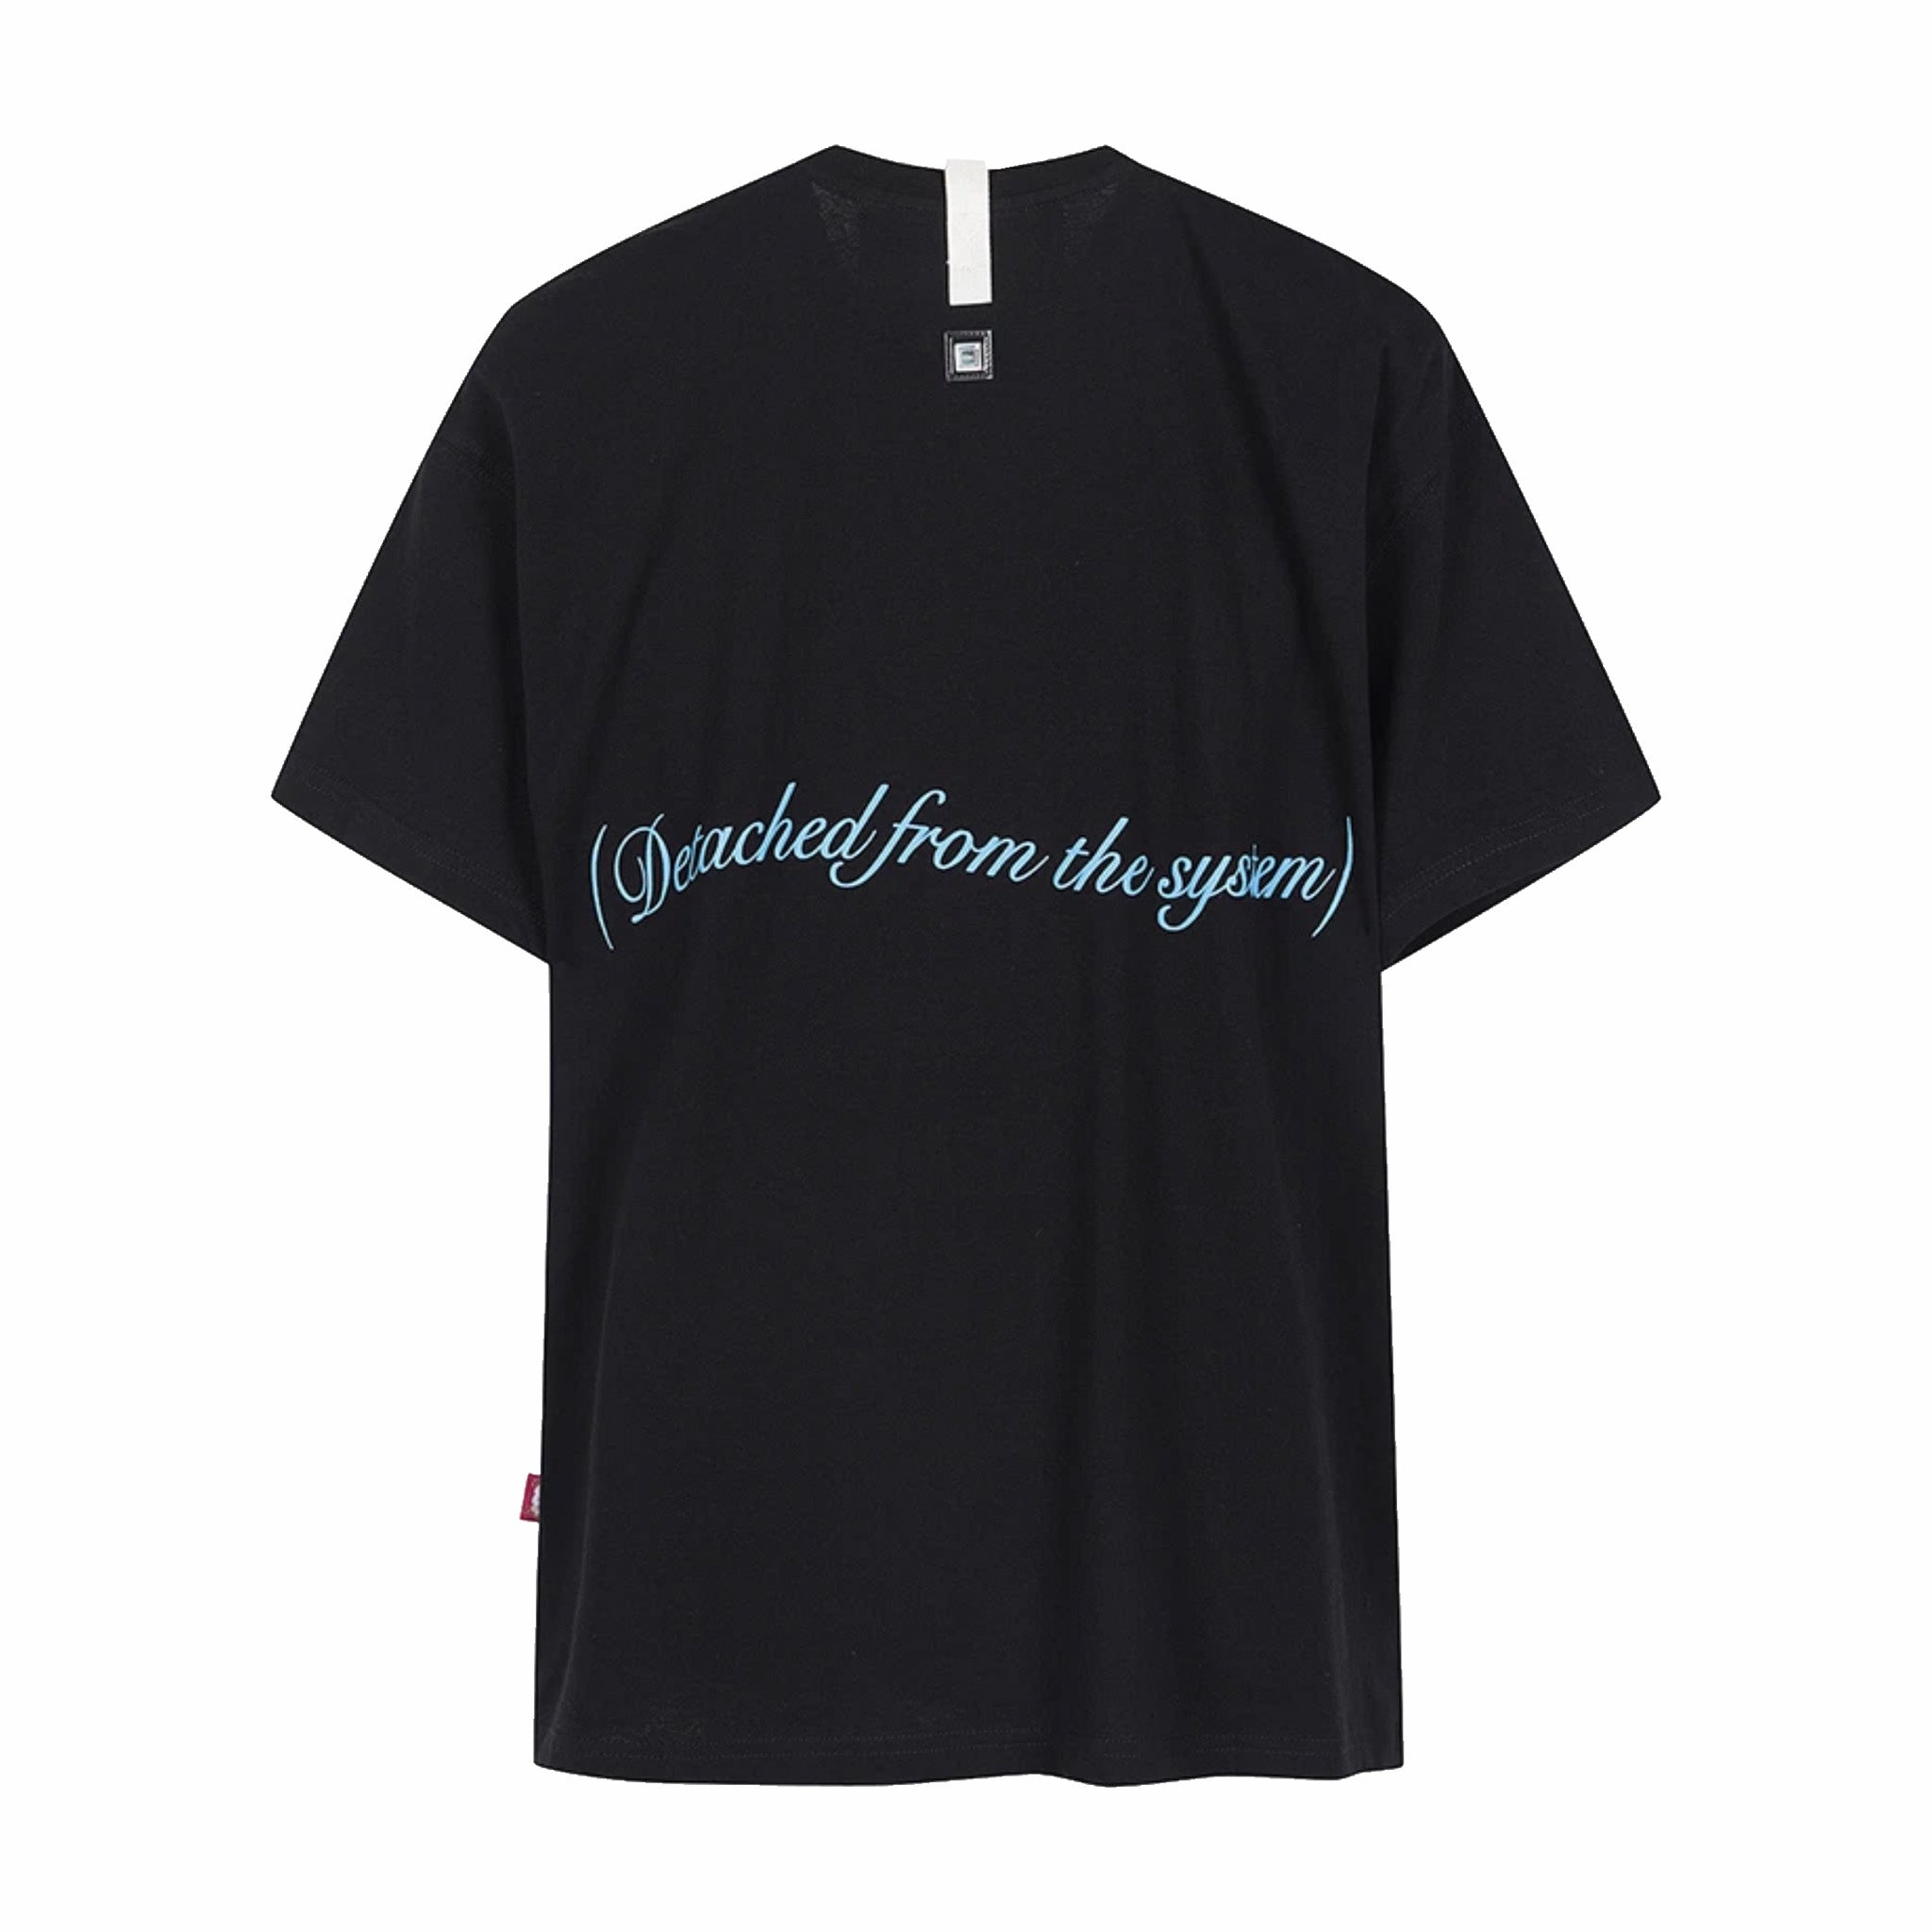 Advisory Board Crystals Herd Mentality SS T-Shirt (Black) - August Shop